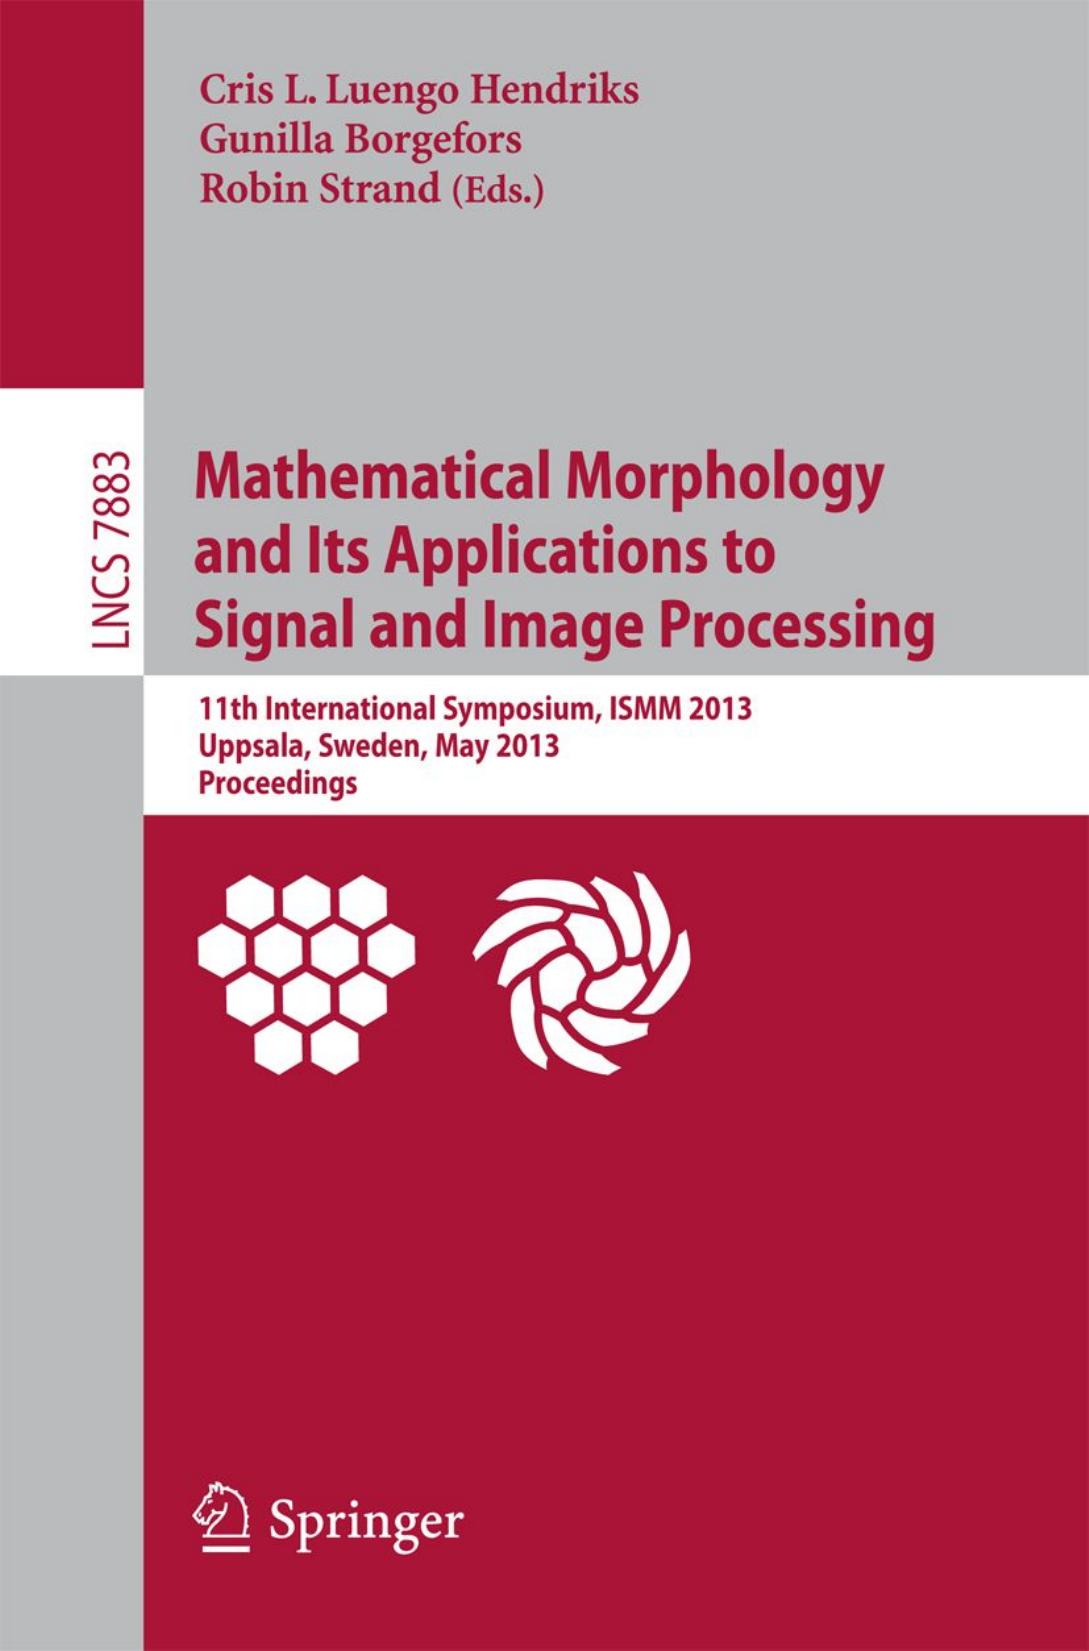 Mathematical Morphology and Its Applications to Signal and Image Processing: 11th International Symposium, ISMM 2013, Uppsala, Sweden, May 27-29, 2013, Proceedings